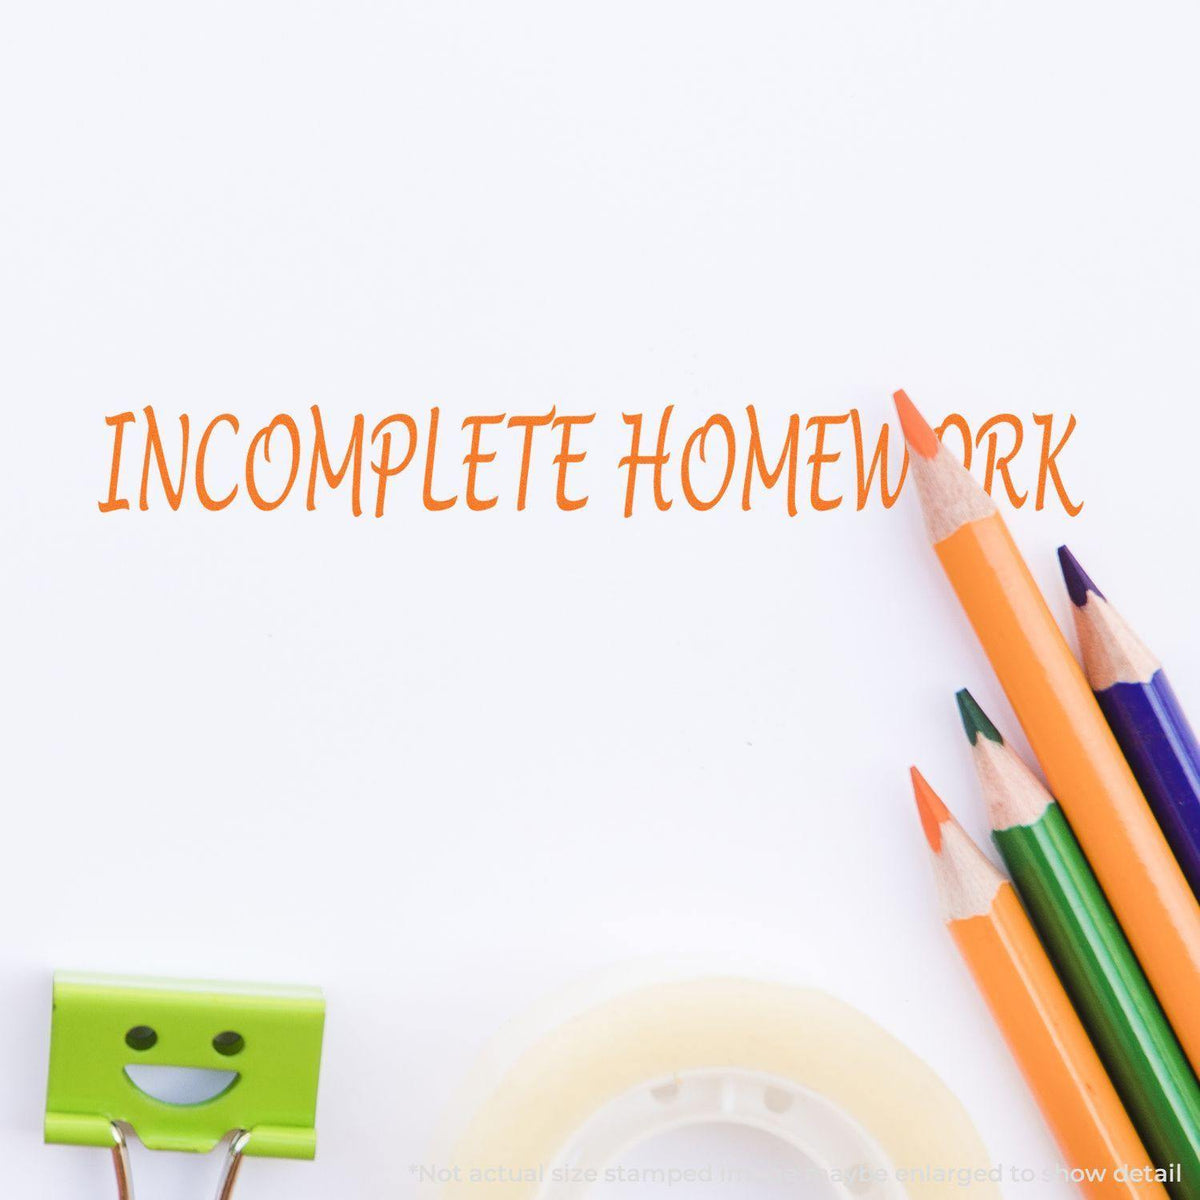 Incomplete Homework Rubber Stamp In Use Photo